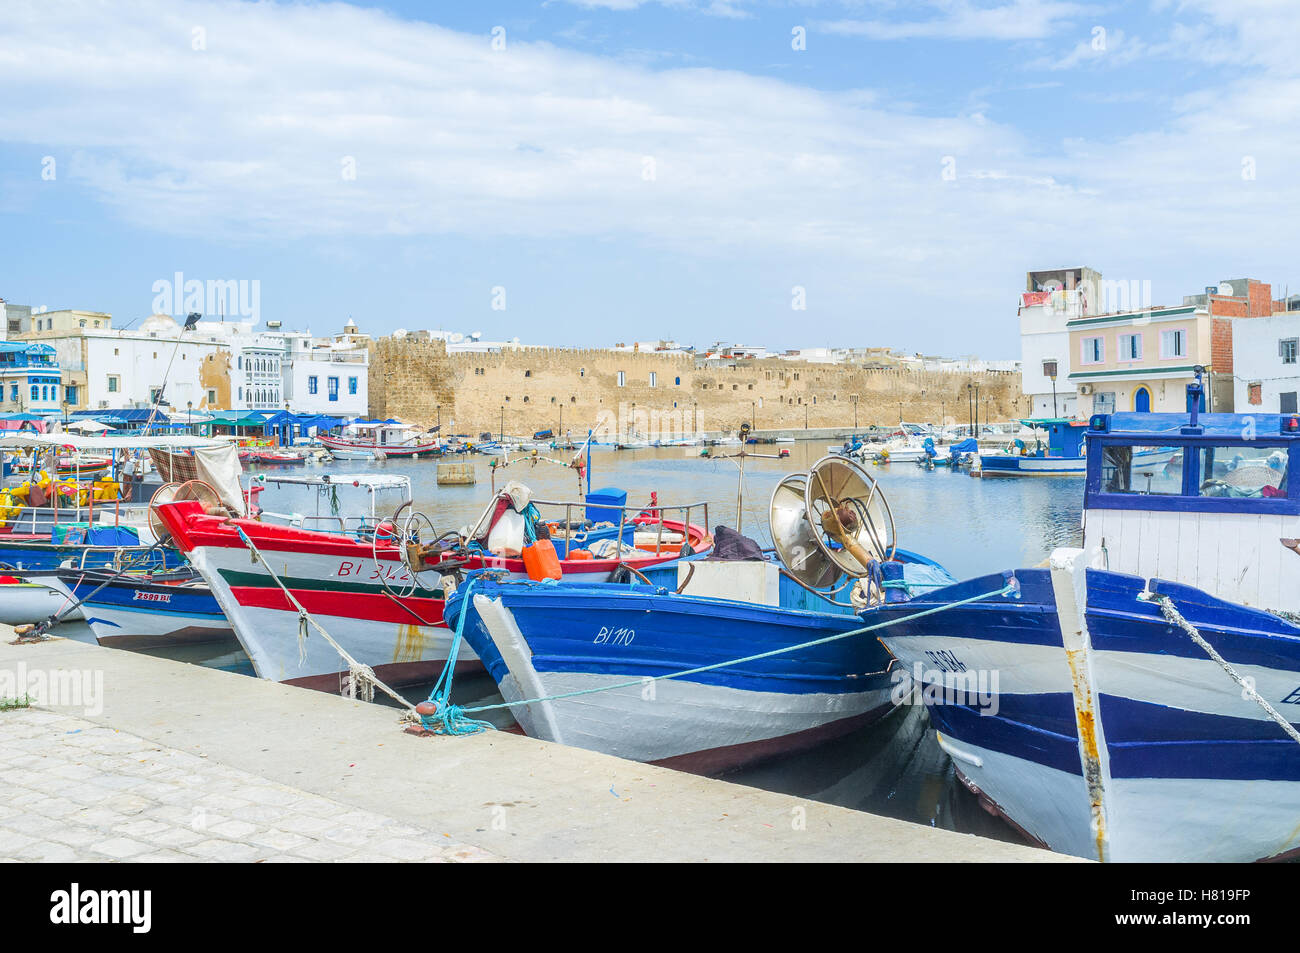 The colorful fishing boats with the Kasbah fortress on the background Stock Photo